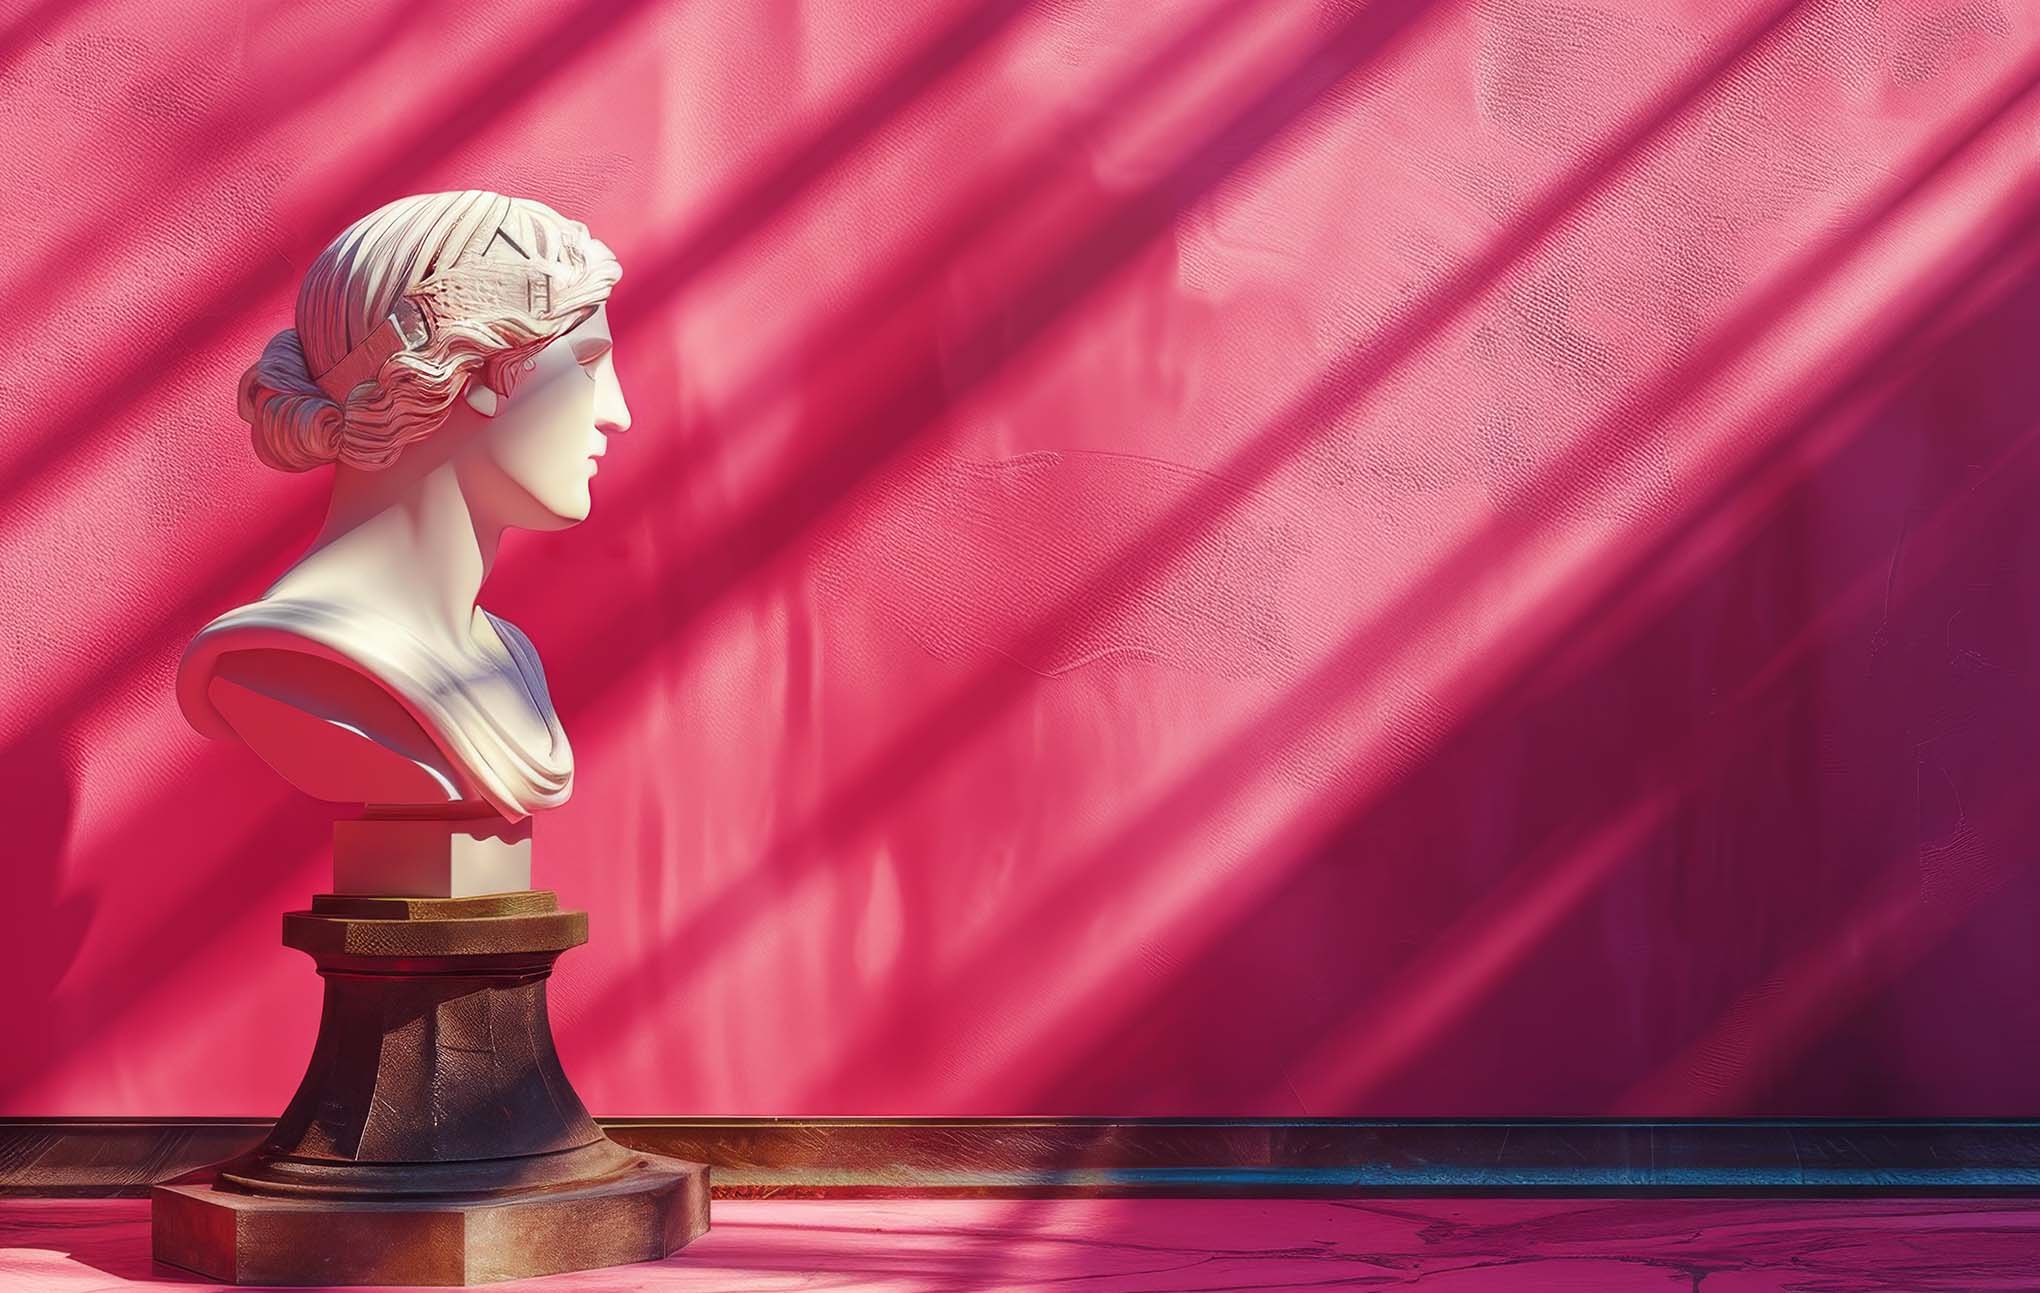 A classical white marble bust of a woman with a blindfold, set against a vivid pink background with dramatic light and shadow patterns. the bust rests on a dark pedestal, highlighting its detailed craftsmanship.